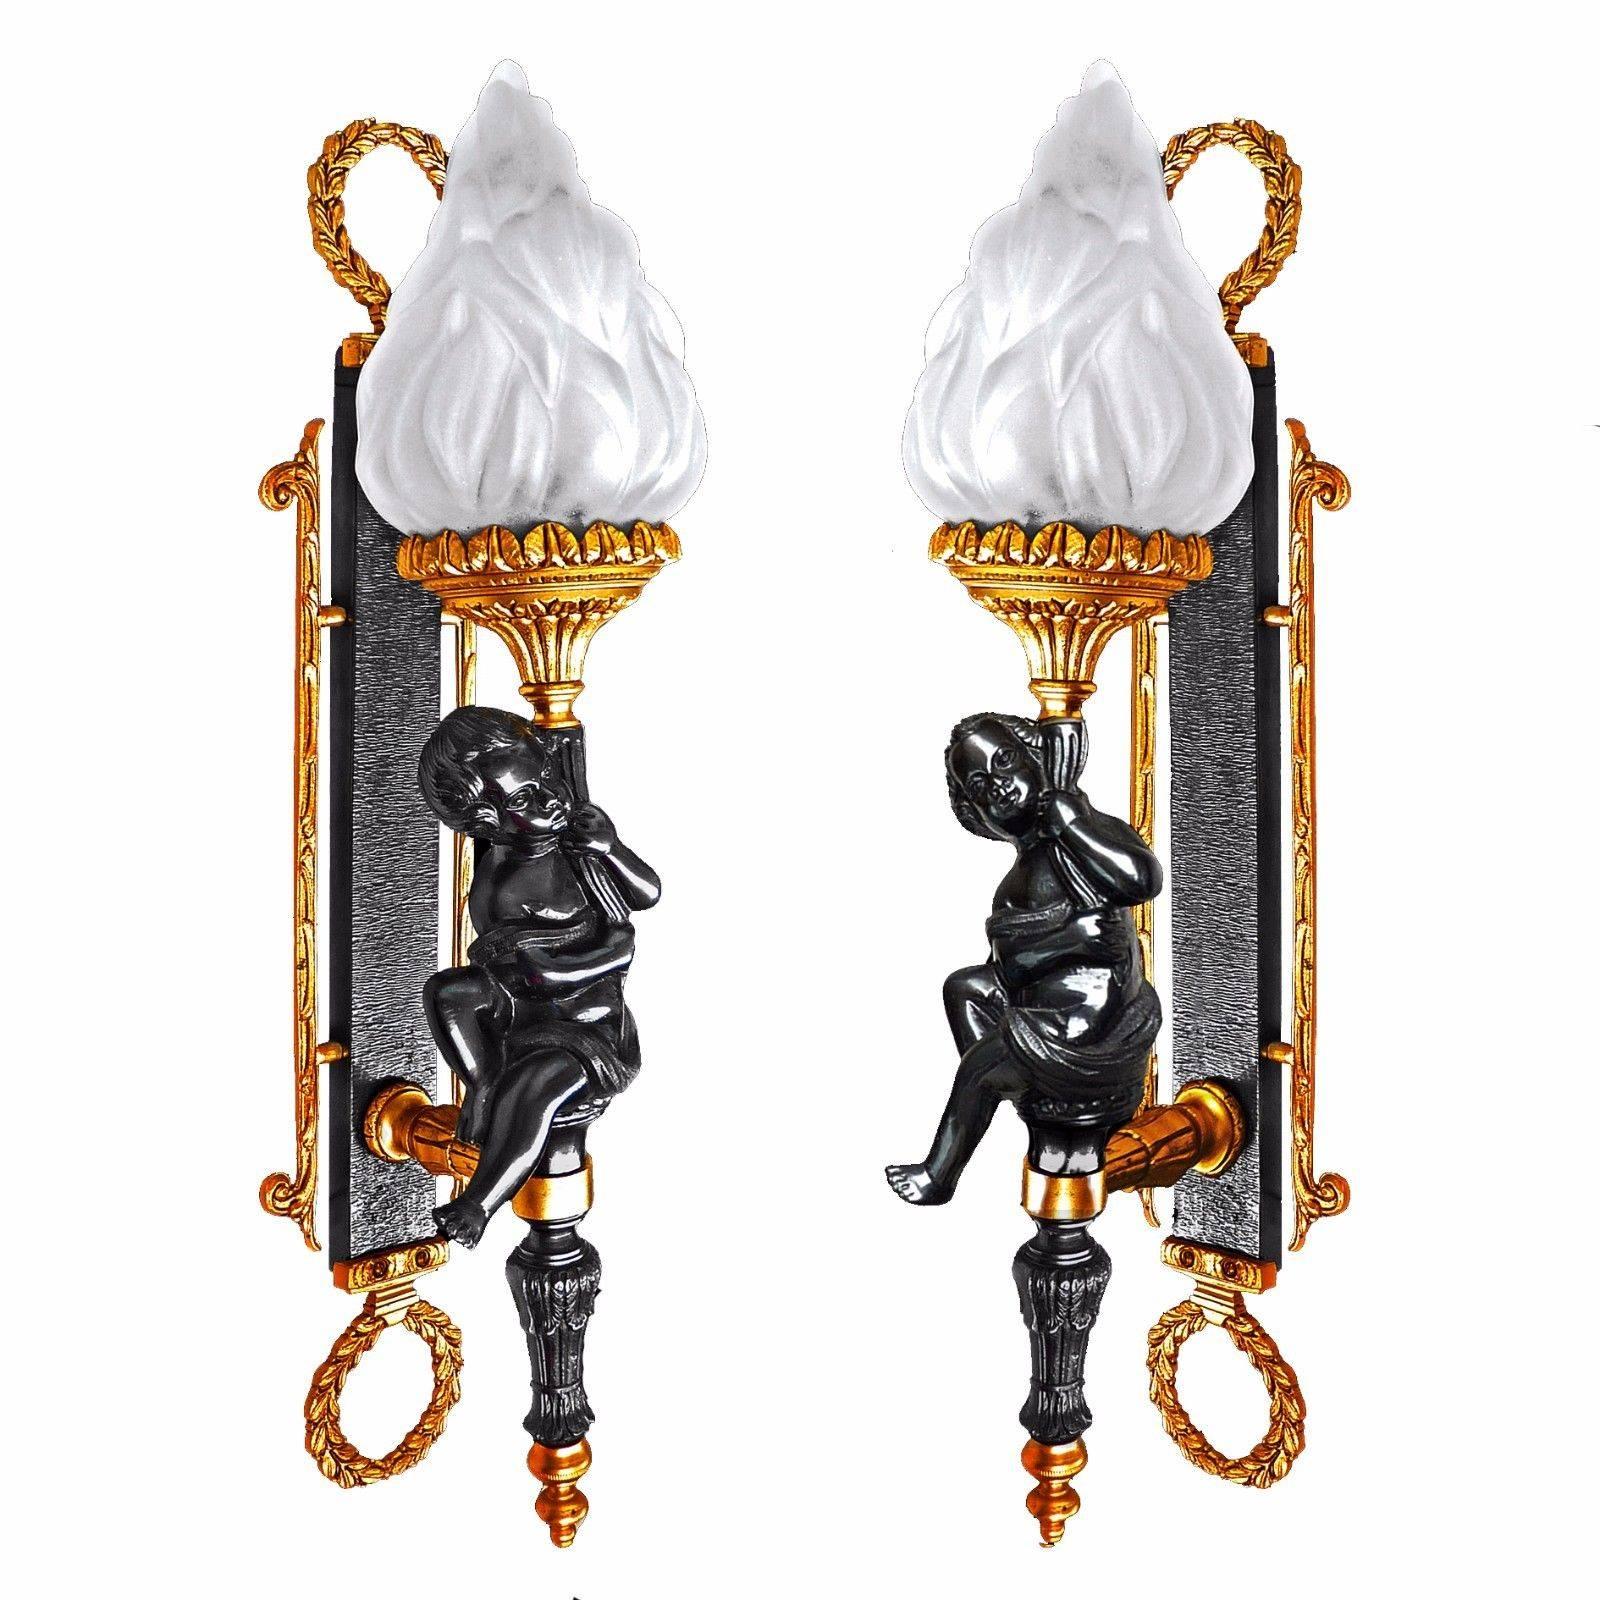 Gorgeous and heavy neoclassical impressive pair of French Empire wall light sconces. Patinated cast bronze cherubs and gilt bronze with frosted glass torch / bronze doré.
Measures:
Height 22 in (55 cm)
Width 6 in. (15 cm)
Depth 8 in. ( 20